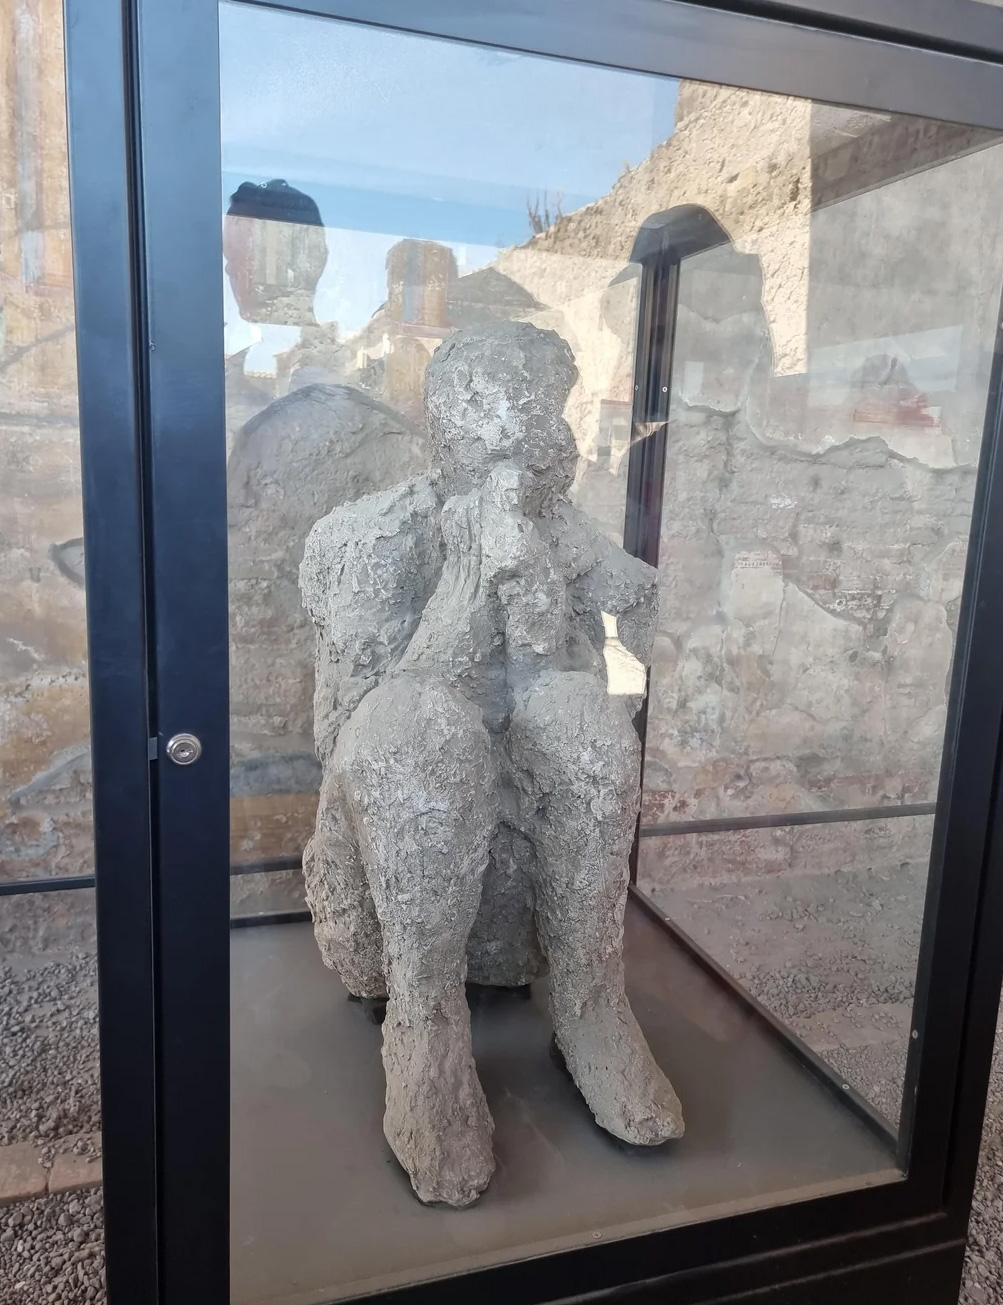 Man was turned into stone while trying to survive a volcano eruption, Pompeii.